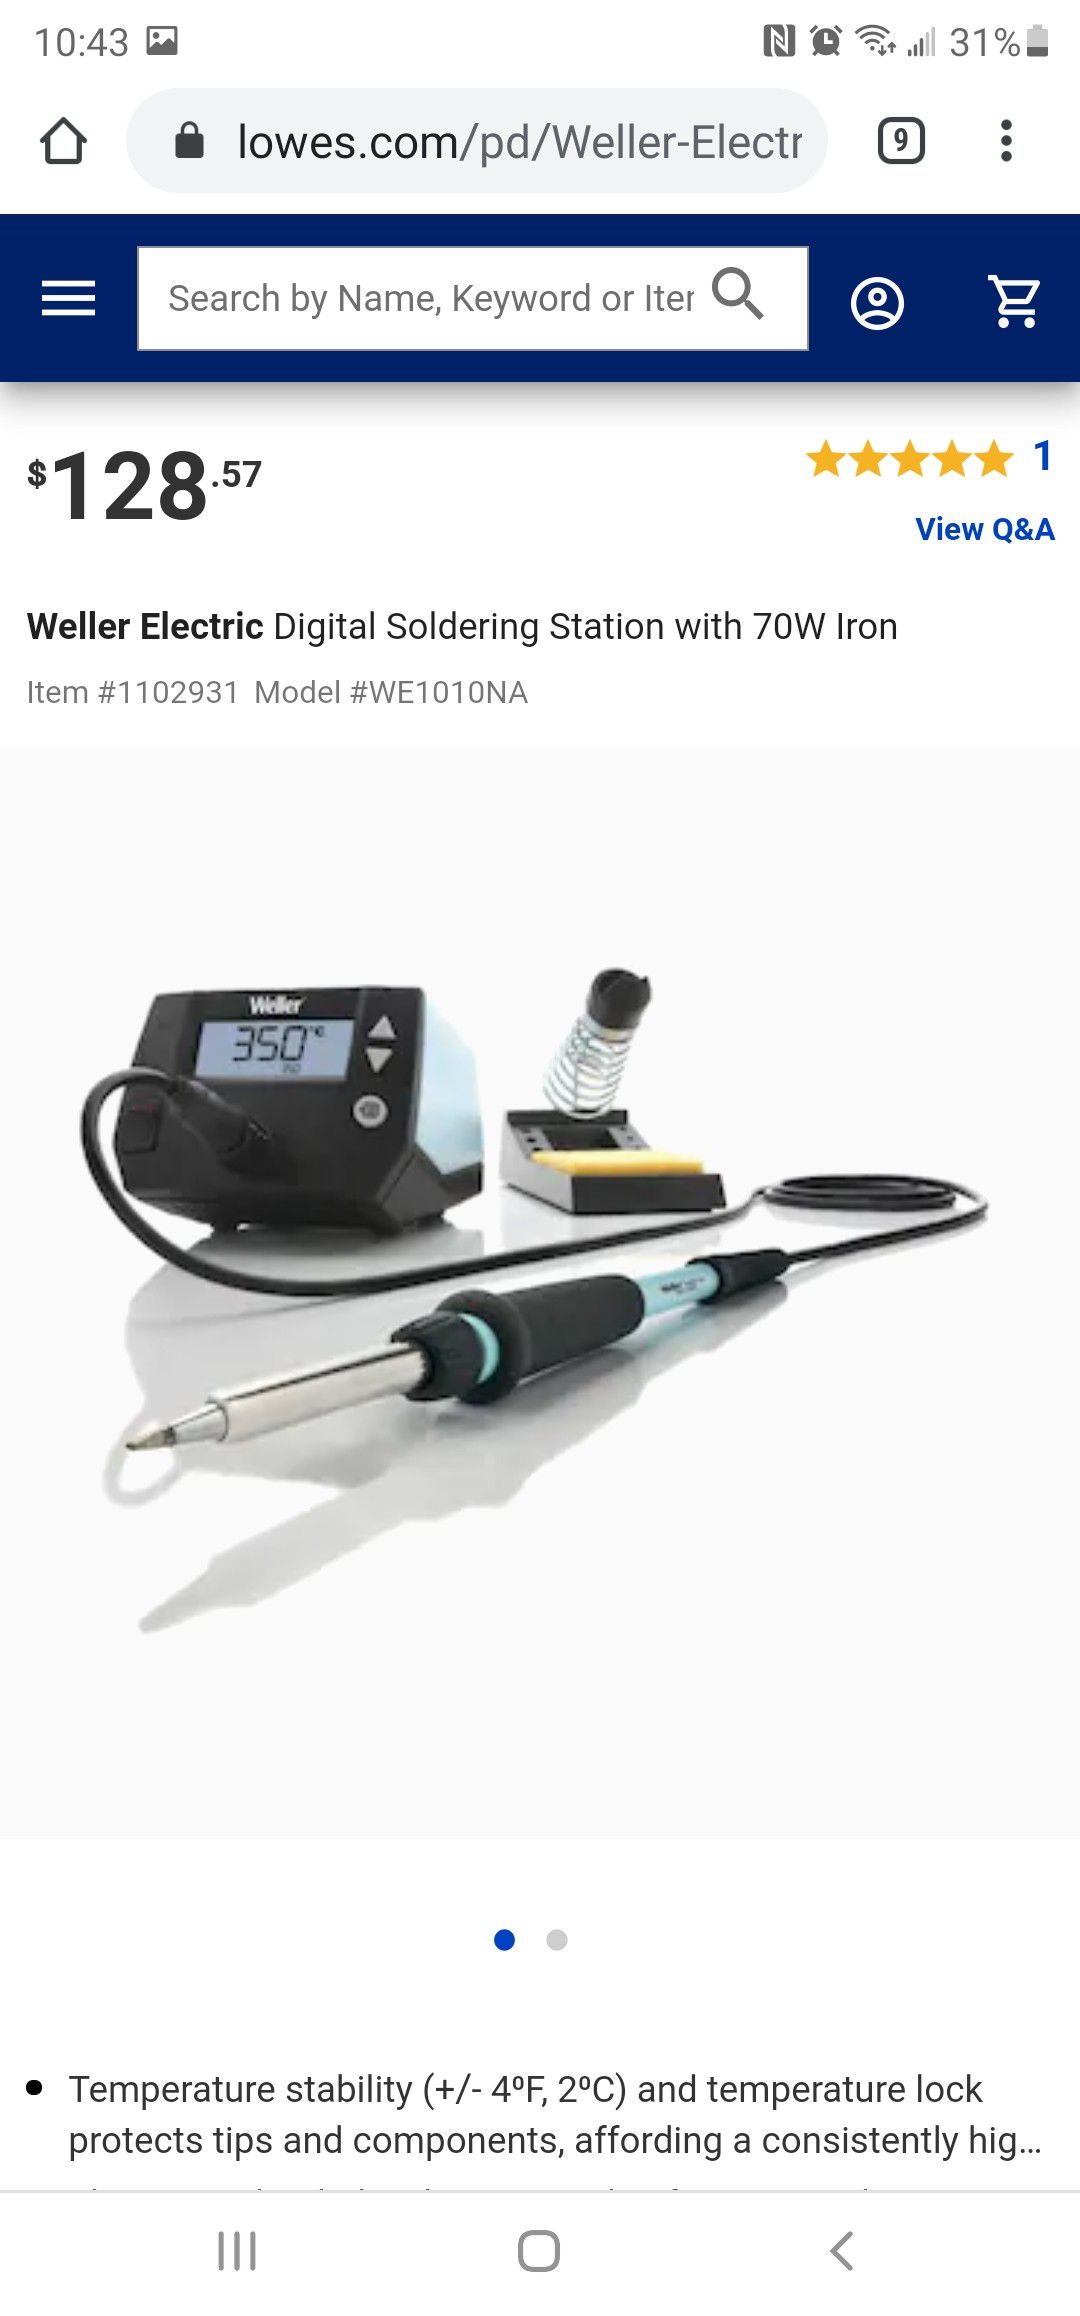 5 Weller Electric Digital Soldering Stations with 70W Iron